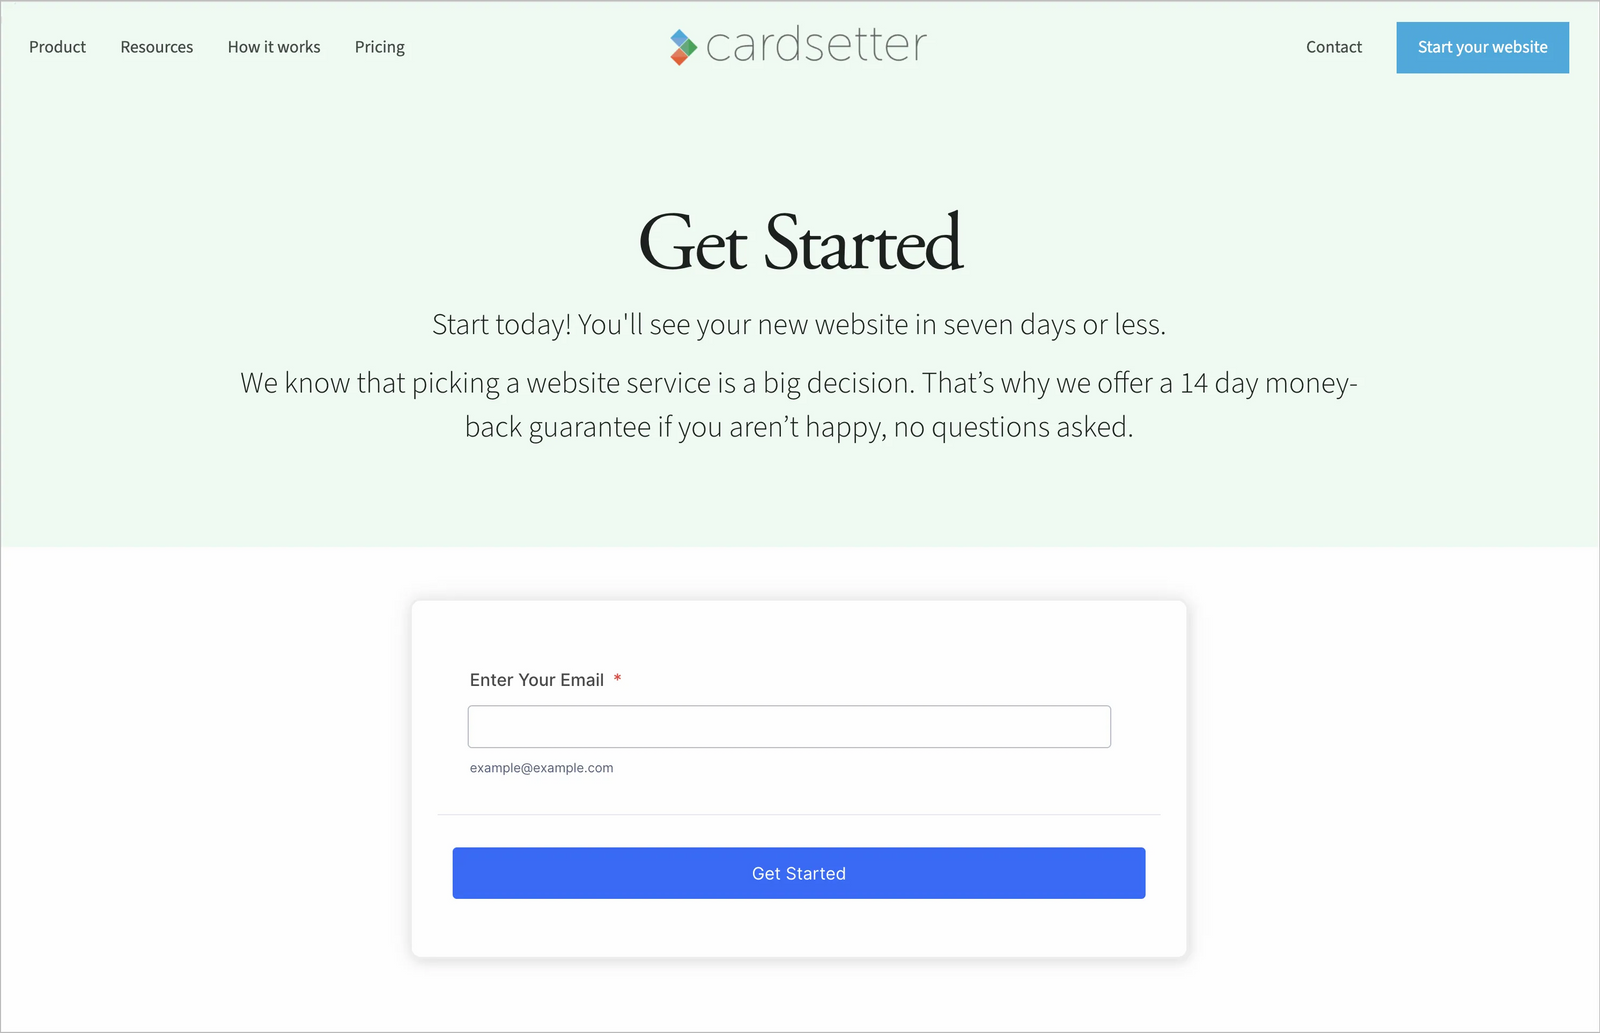 An example of a conversion page on the Cardsetter website.